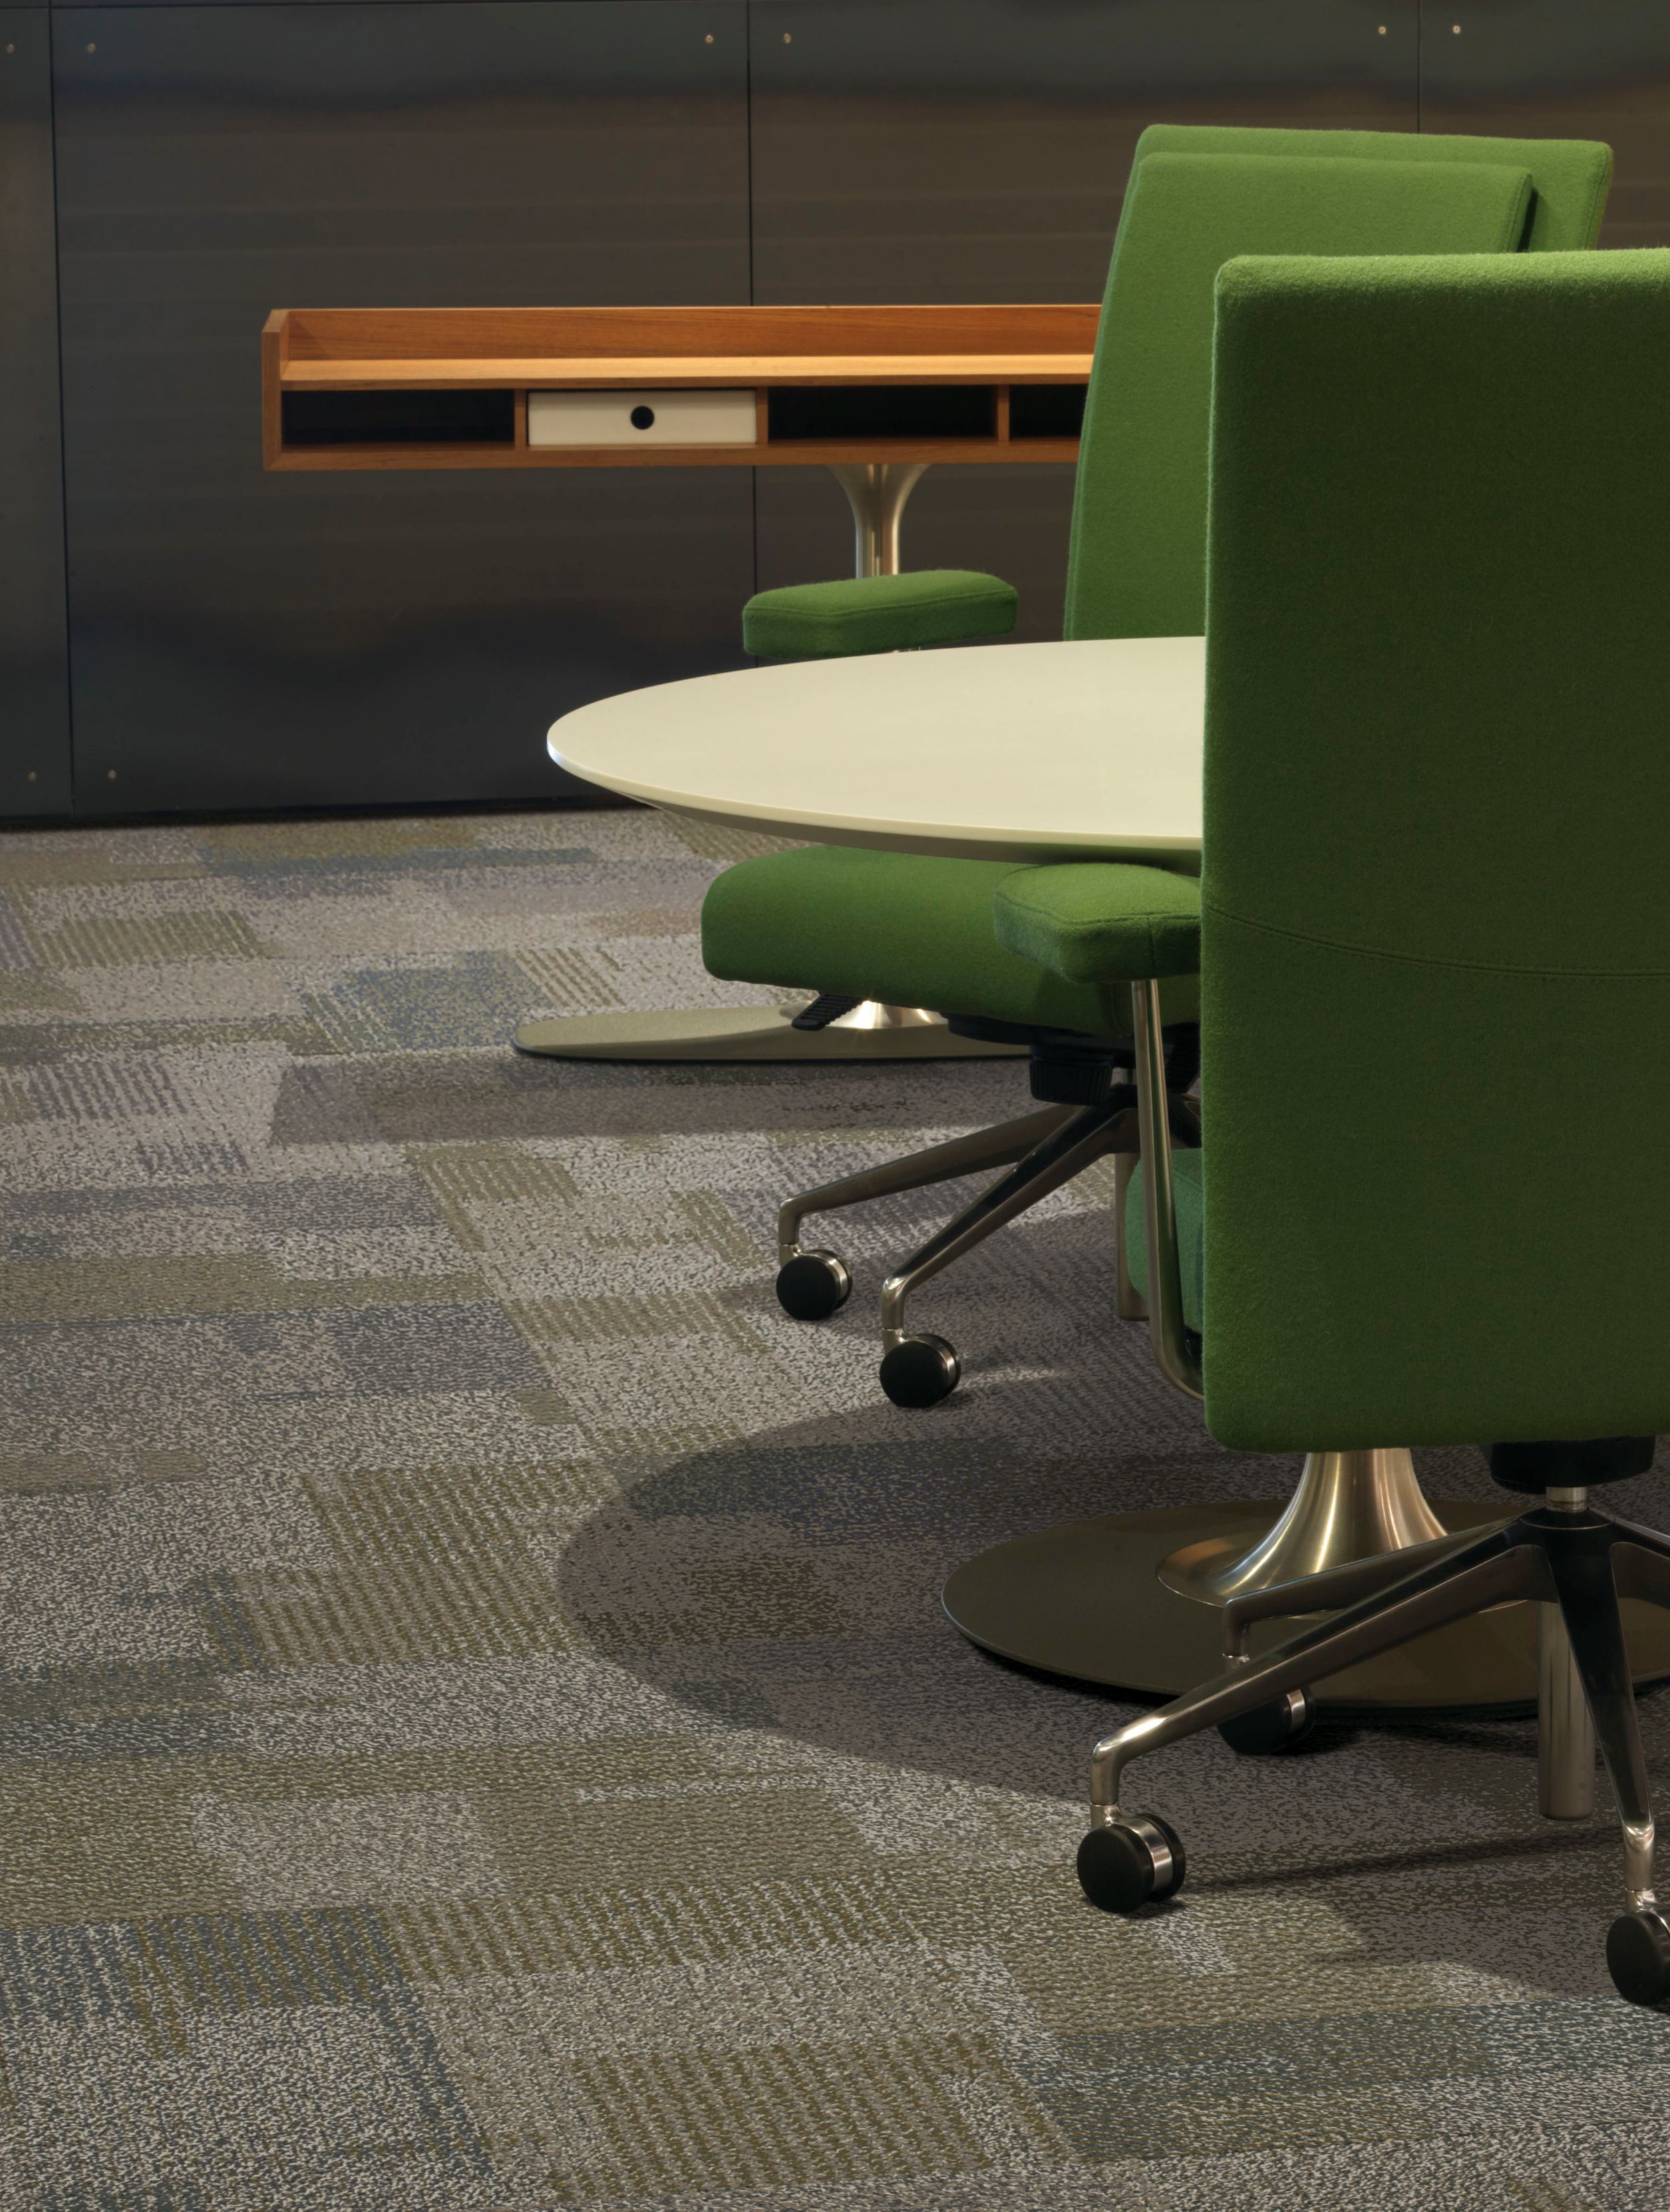 Interface Entropy carpet tile in room with green chairs and wooden shelf in background numéro d’image 6